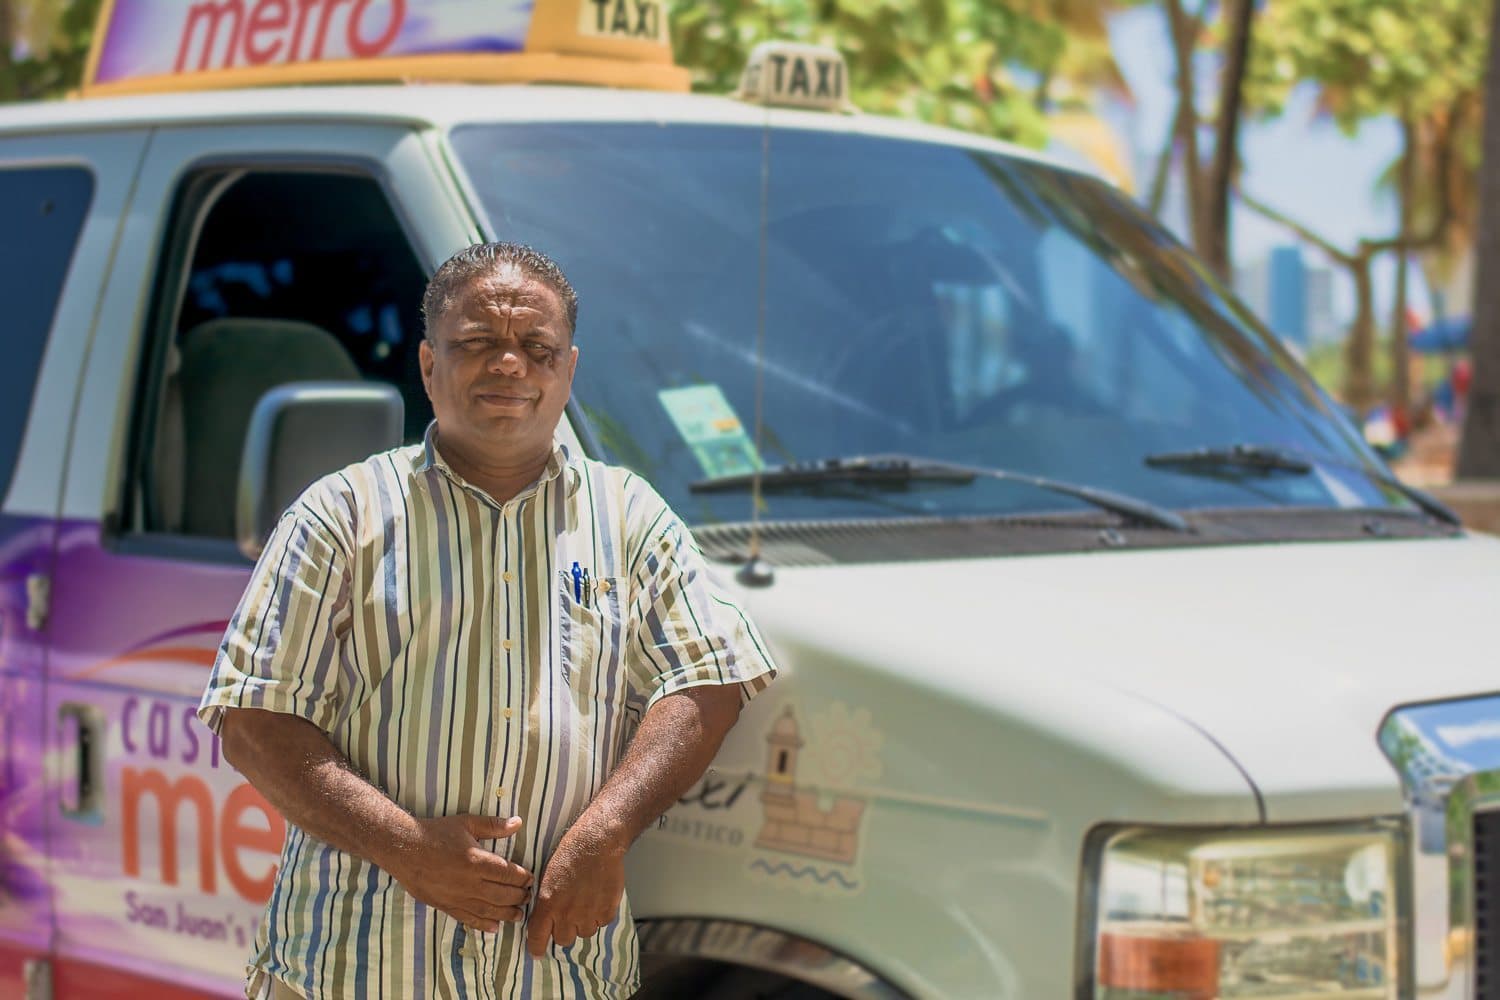 Andino Also Known as Bombero Taxi Driver